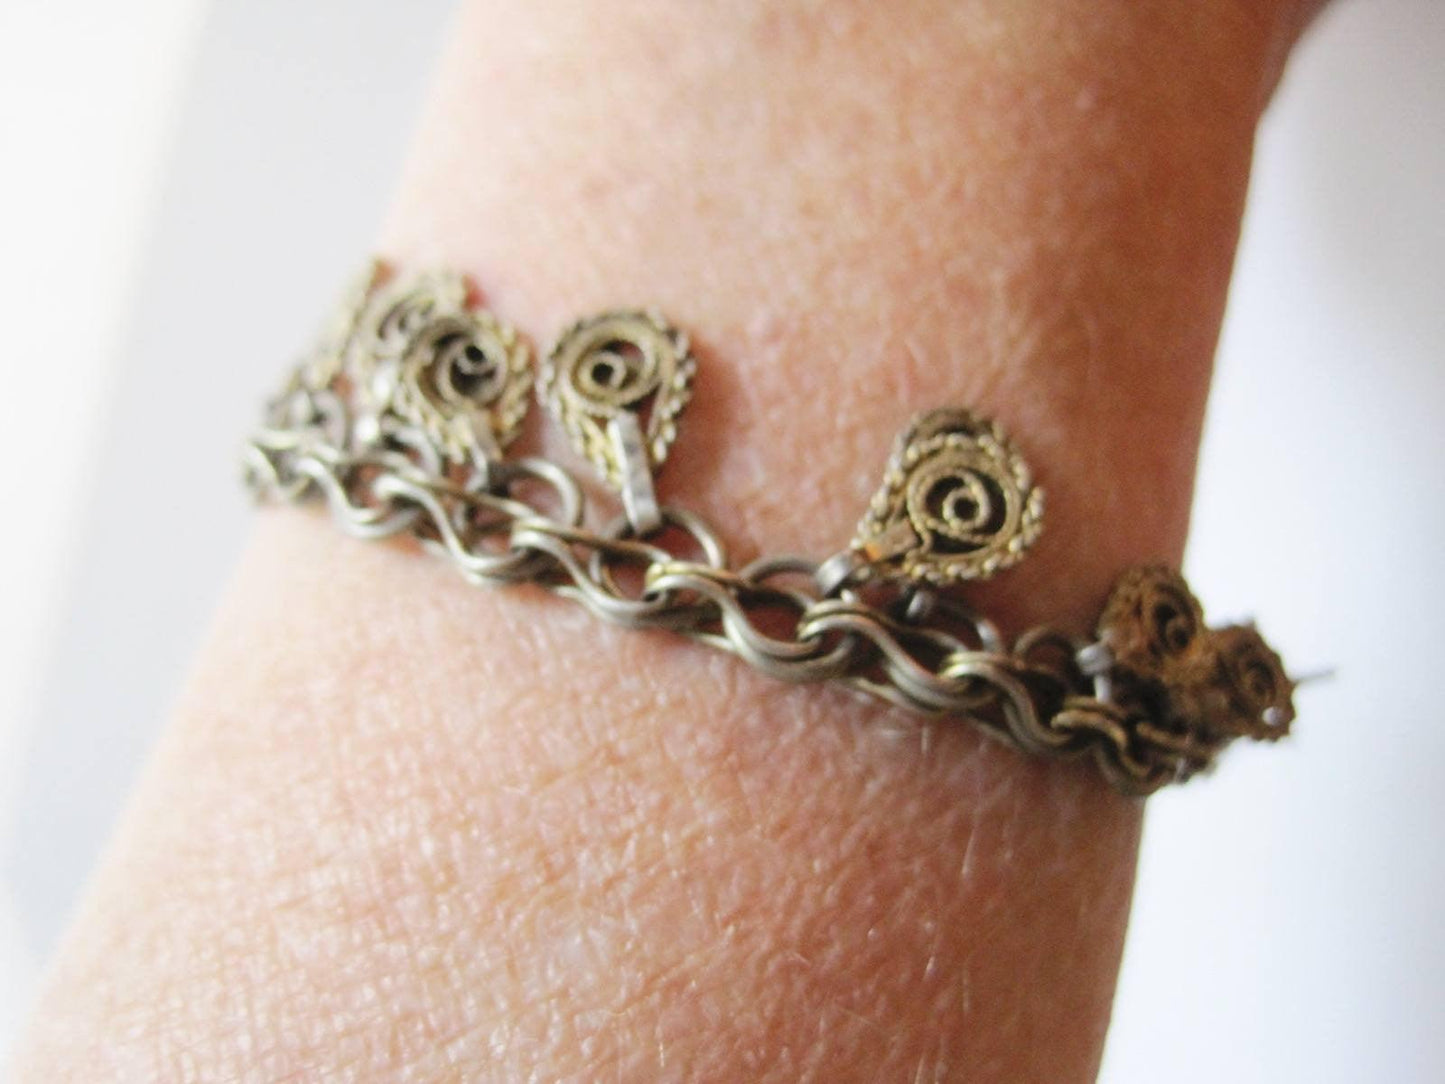 filigree chain used as a bracelet